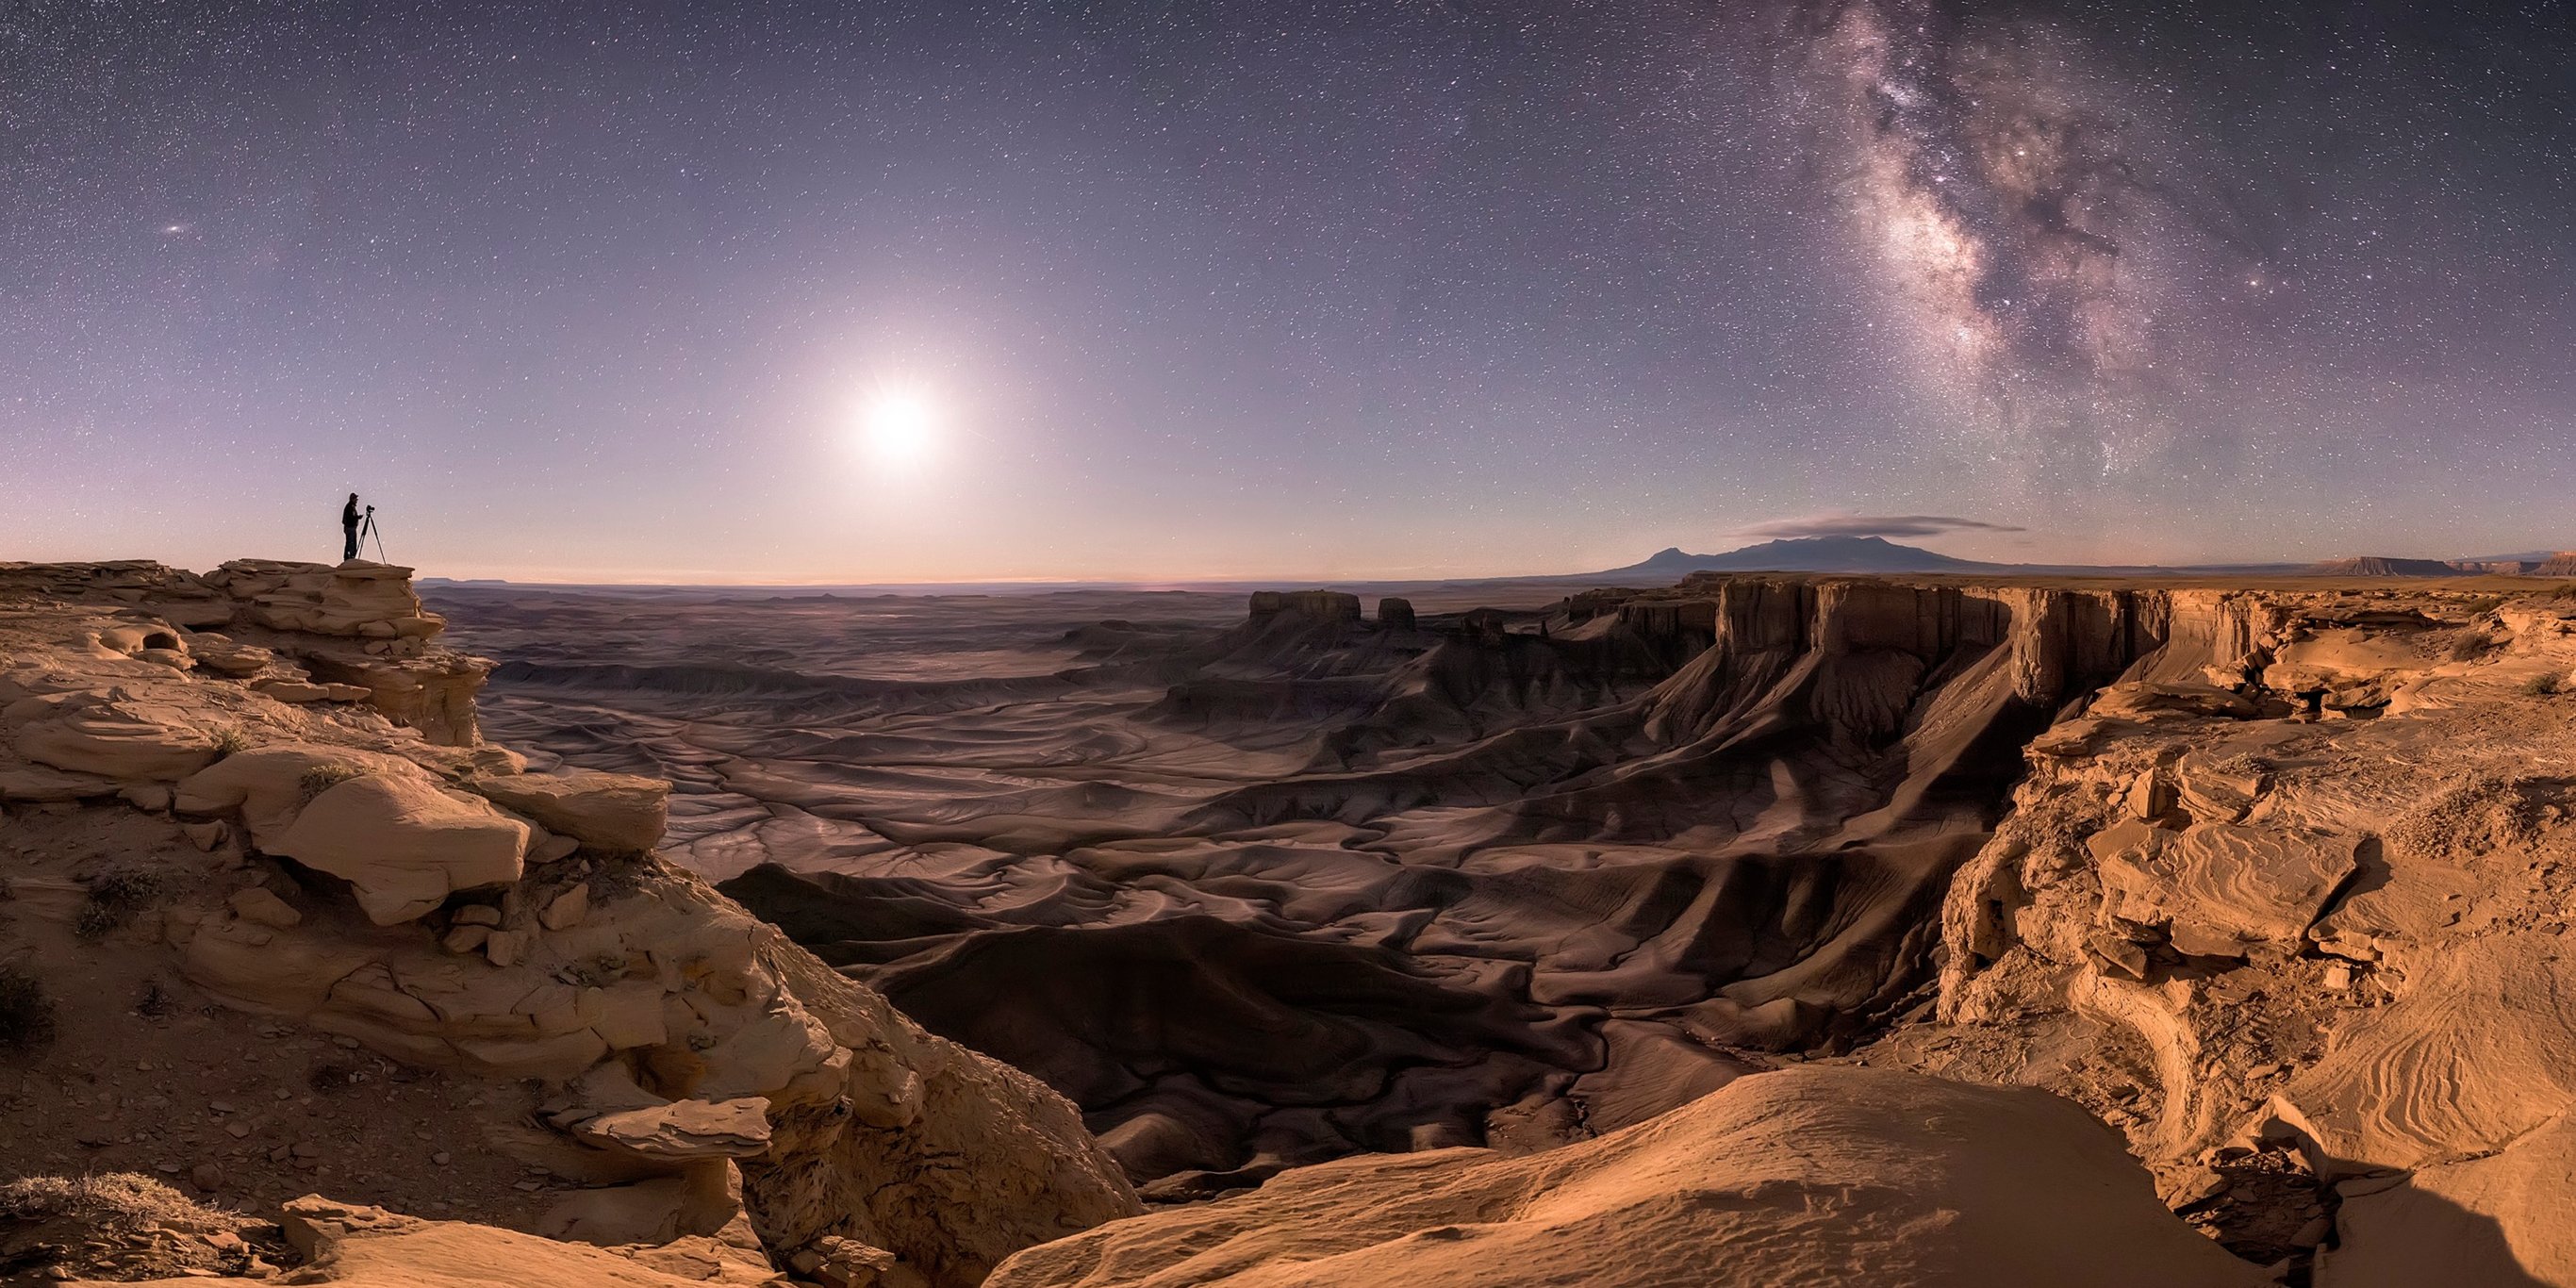 22 of the best photos of stars, galaxies, and space taken this year